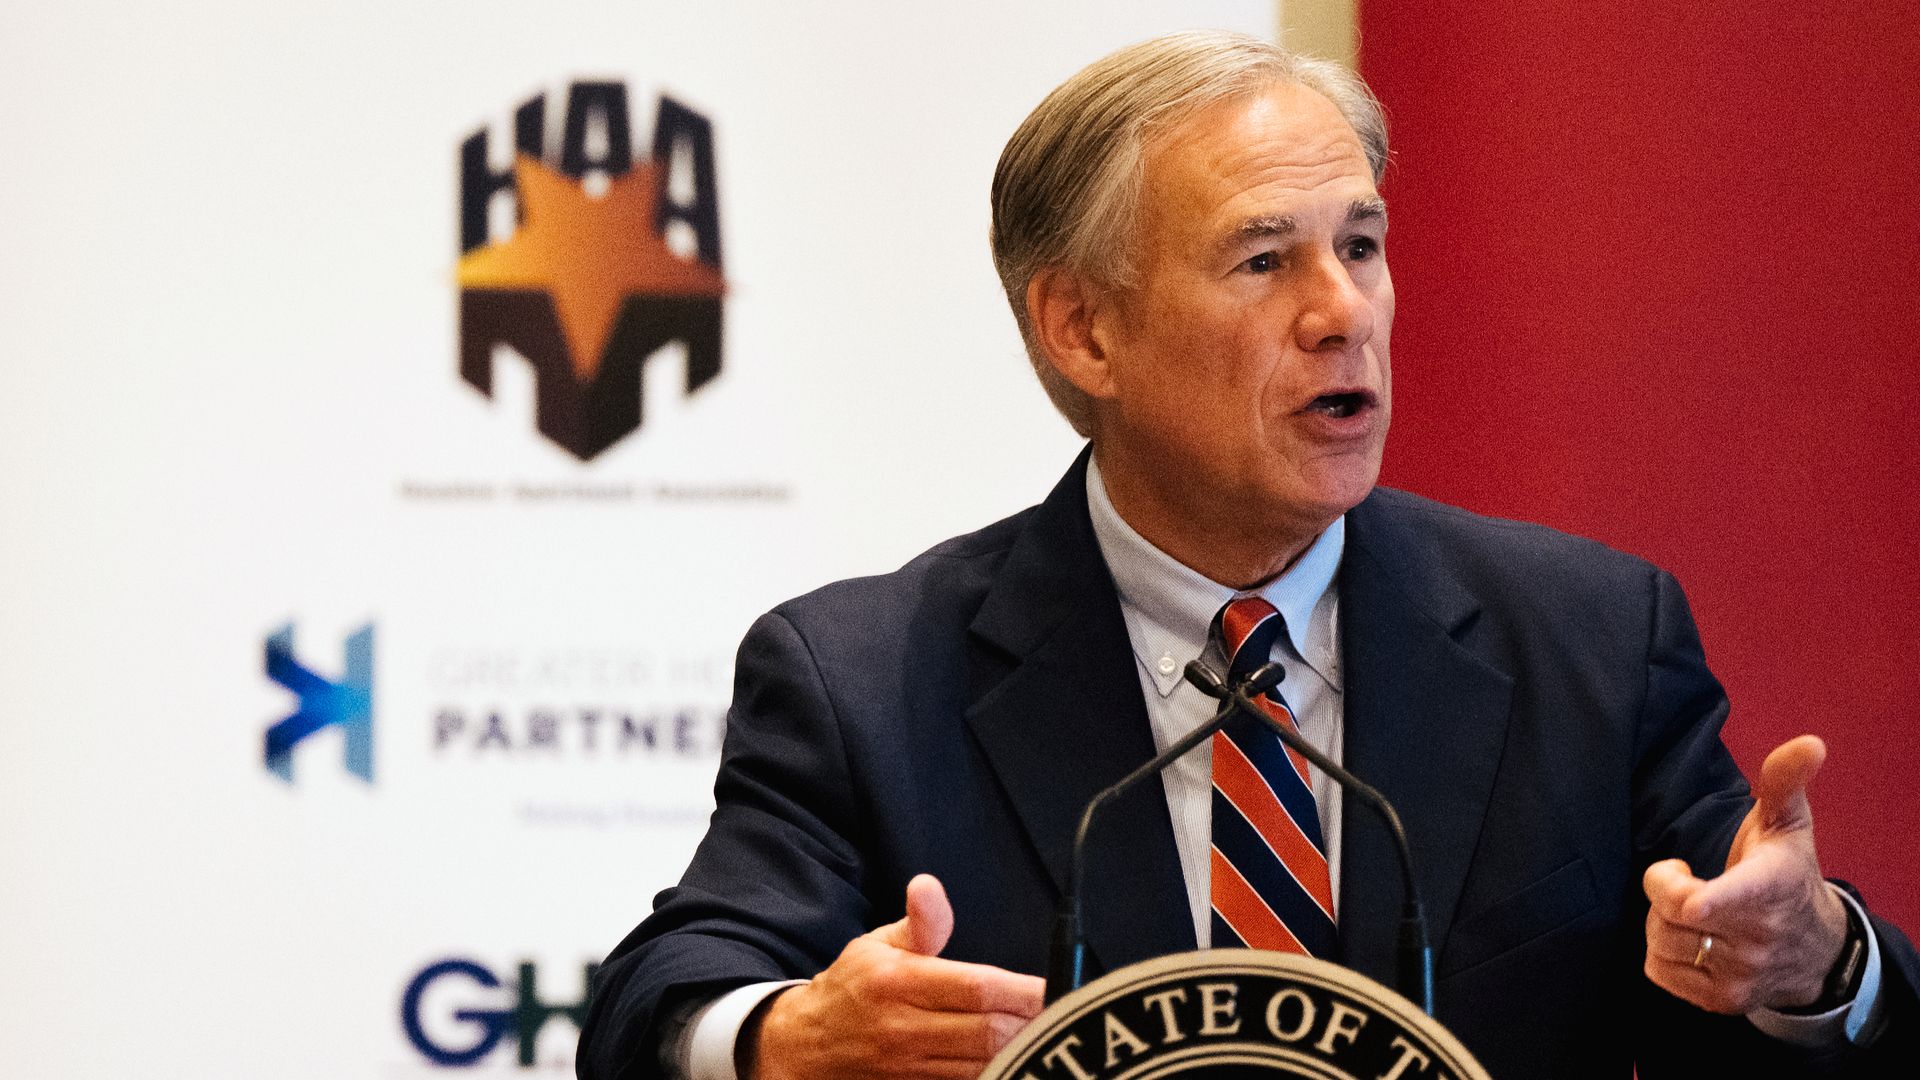  Texas Governor Greg Abbott speaks during the Houston Region Business Coalition's monthly meeting on October 27, 2021 in Houston, Texas.